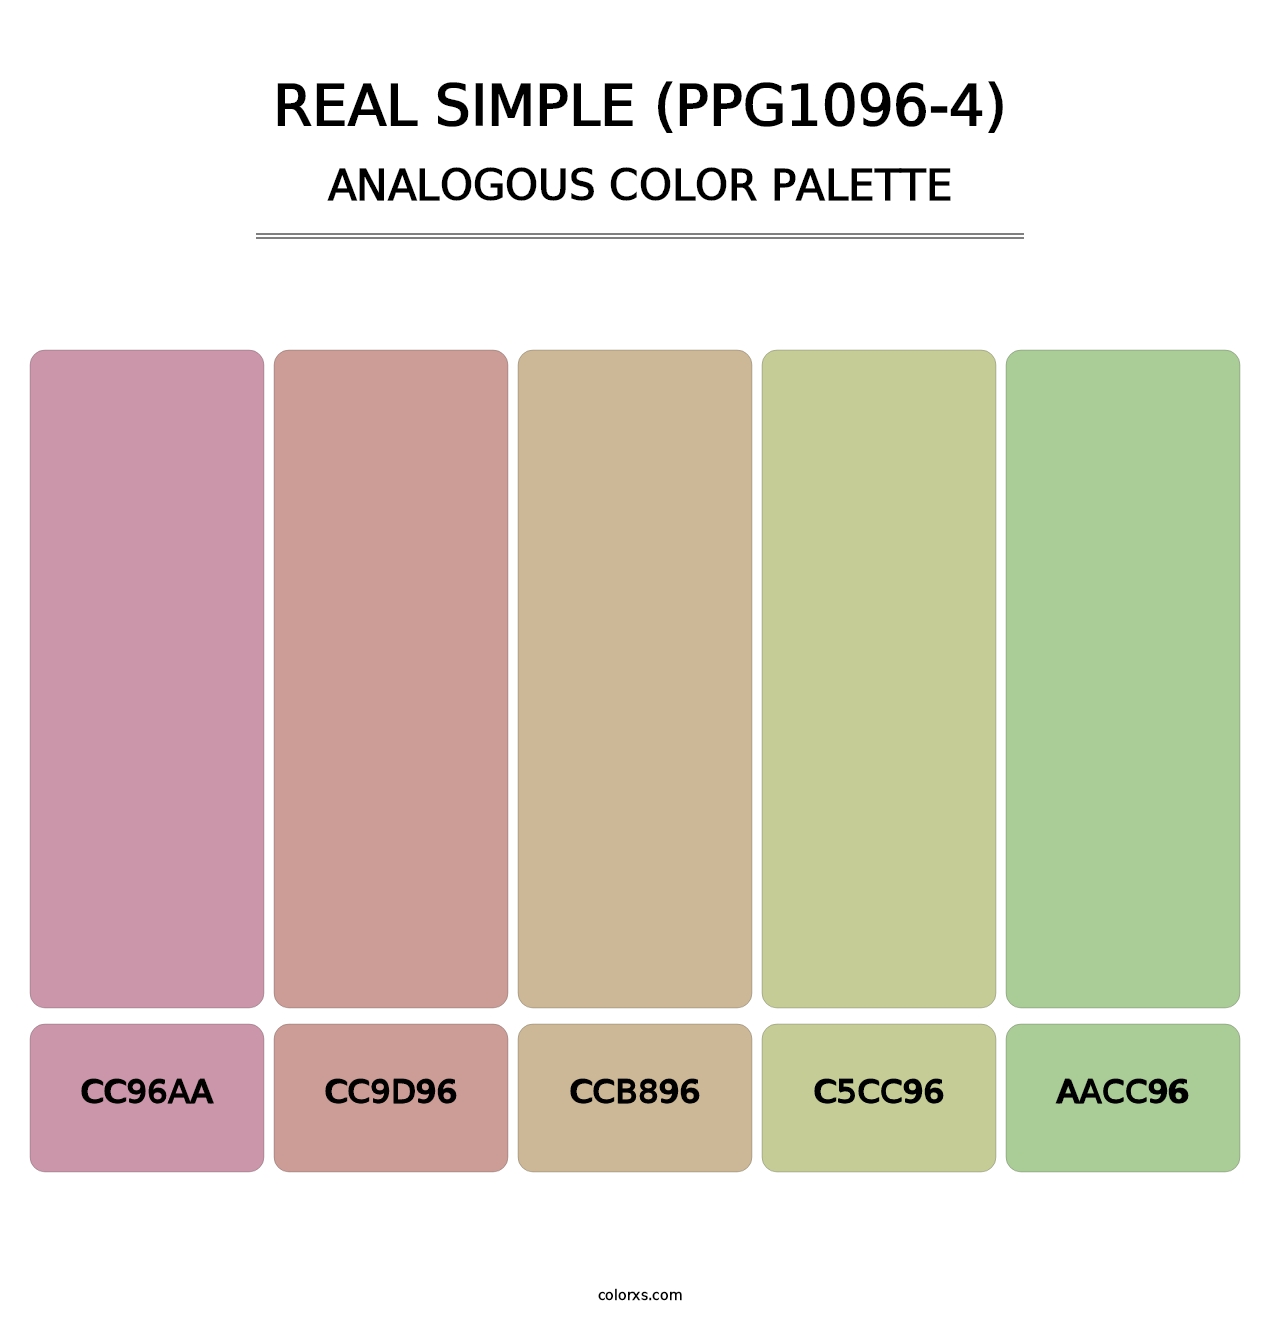 Real Simple (PPG1096-4) - Analogous Color Palette